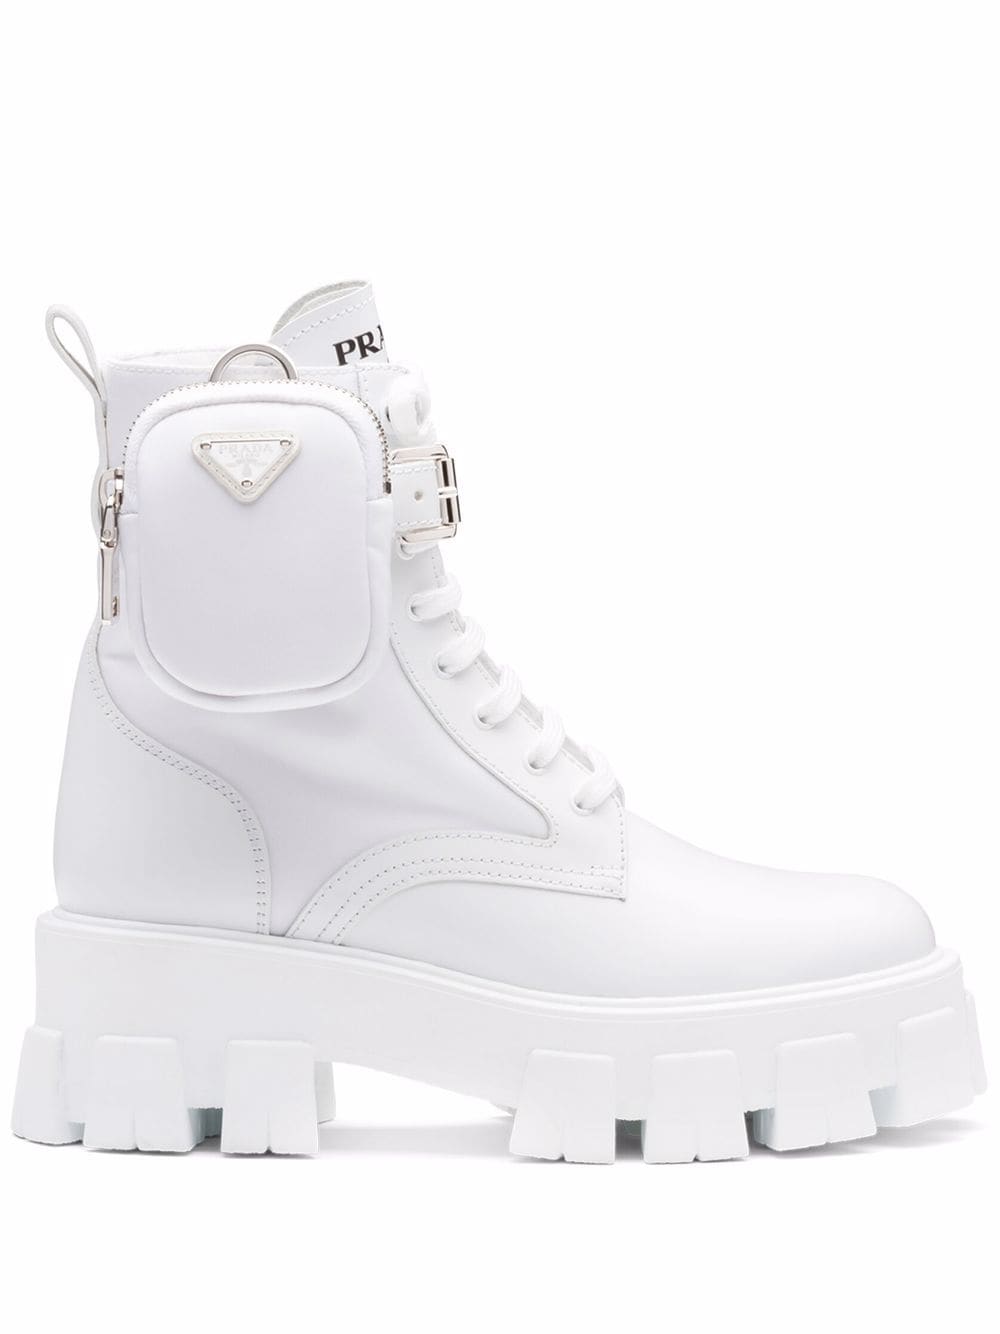 Prada Moonlith brushed leather biker boots - White